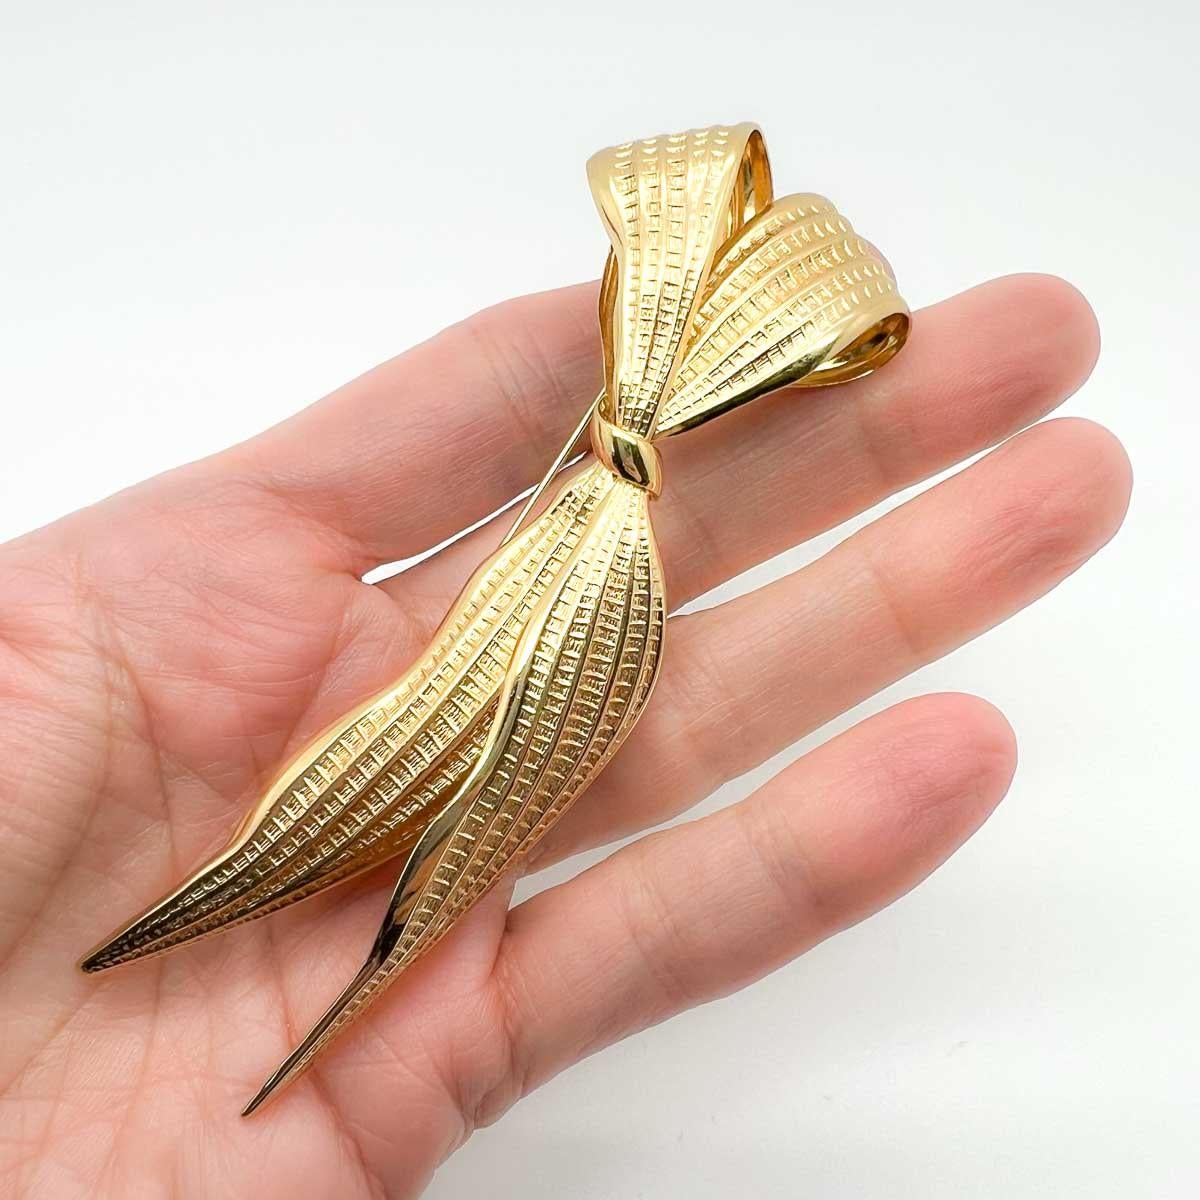 A fabulous elongated vintage Dior Bow brooch. With an open three-dimensional design and striking scale this a beautiful piece to adorn your lapel with. Timeless style and charm abound with this archive piece from the House of Dior.
With archive